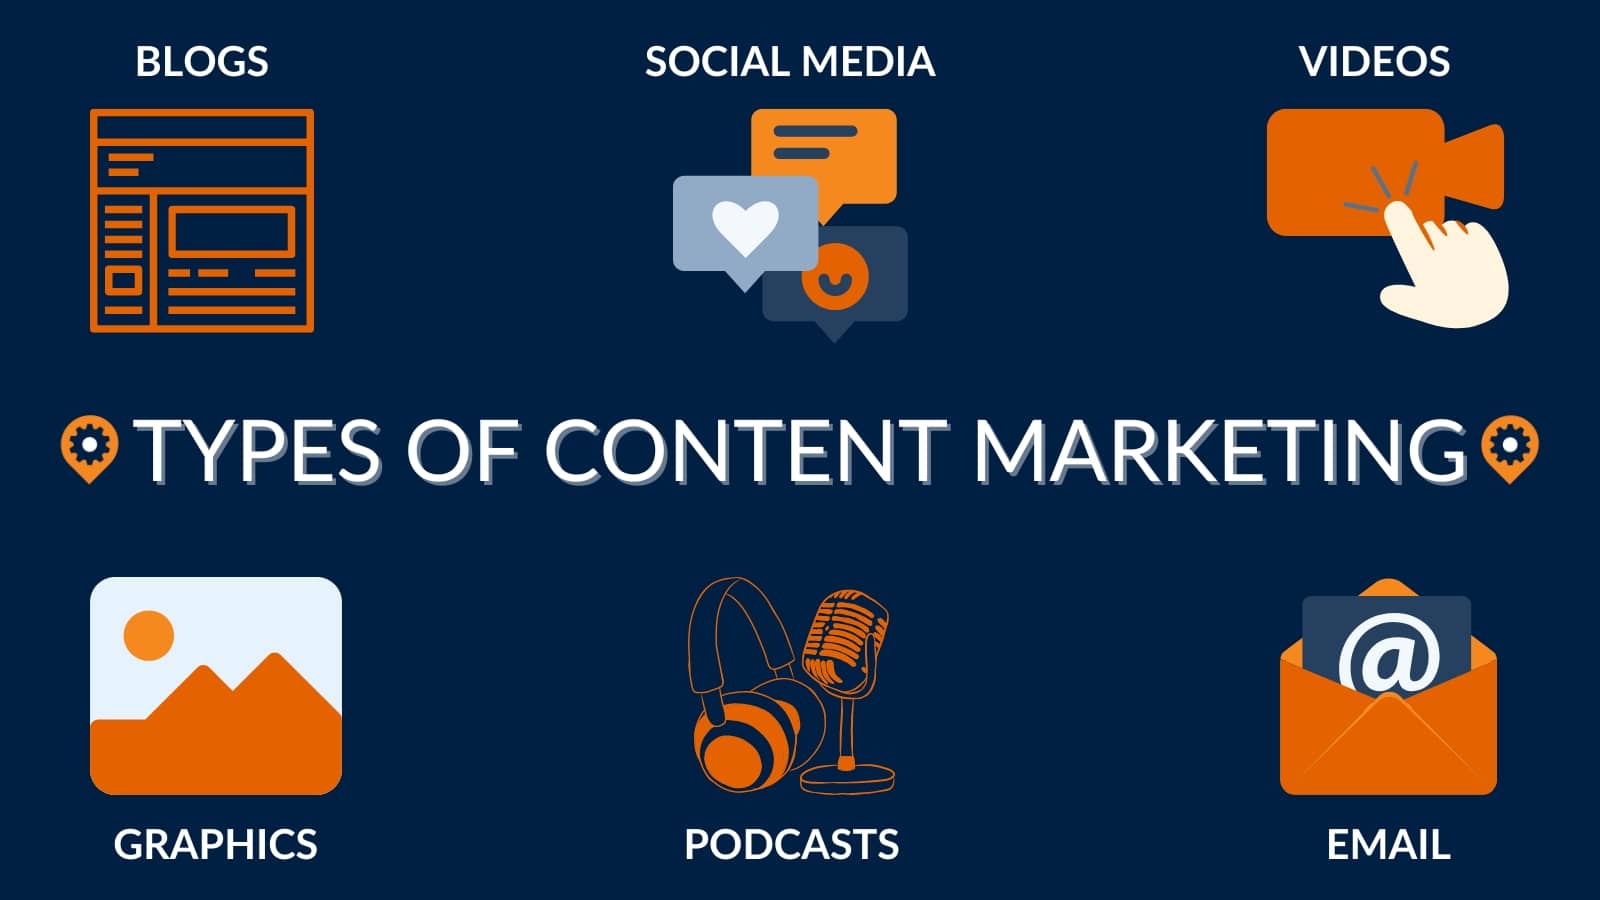 The types of content marketing channels include blogs, social media, videos, graphics, podcasts, and email.